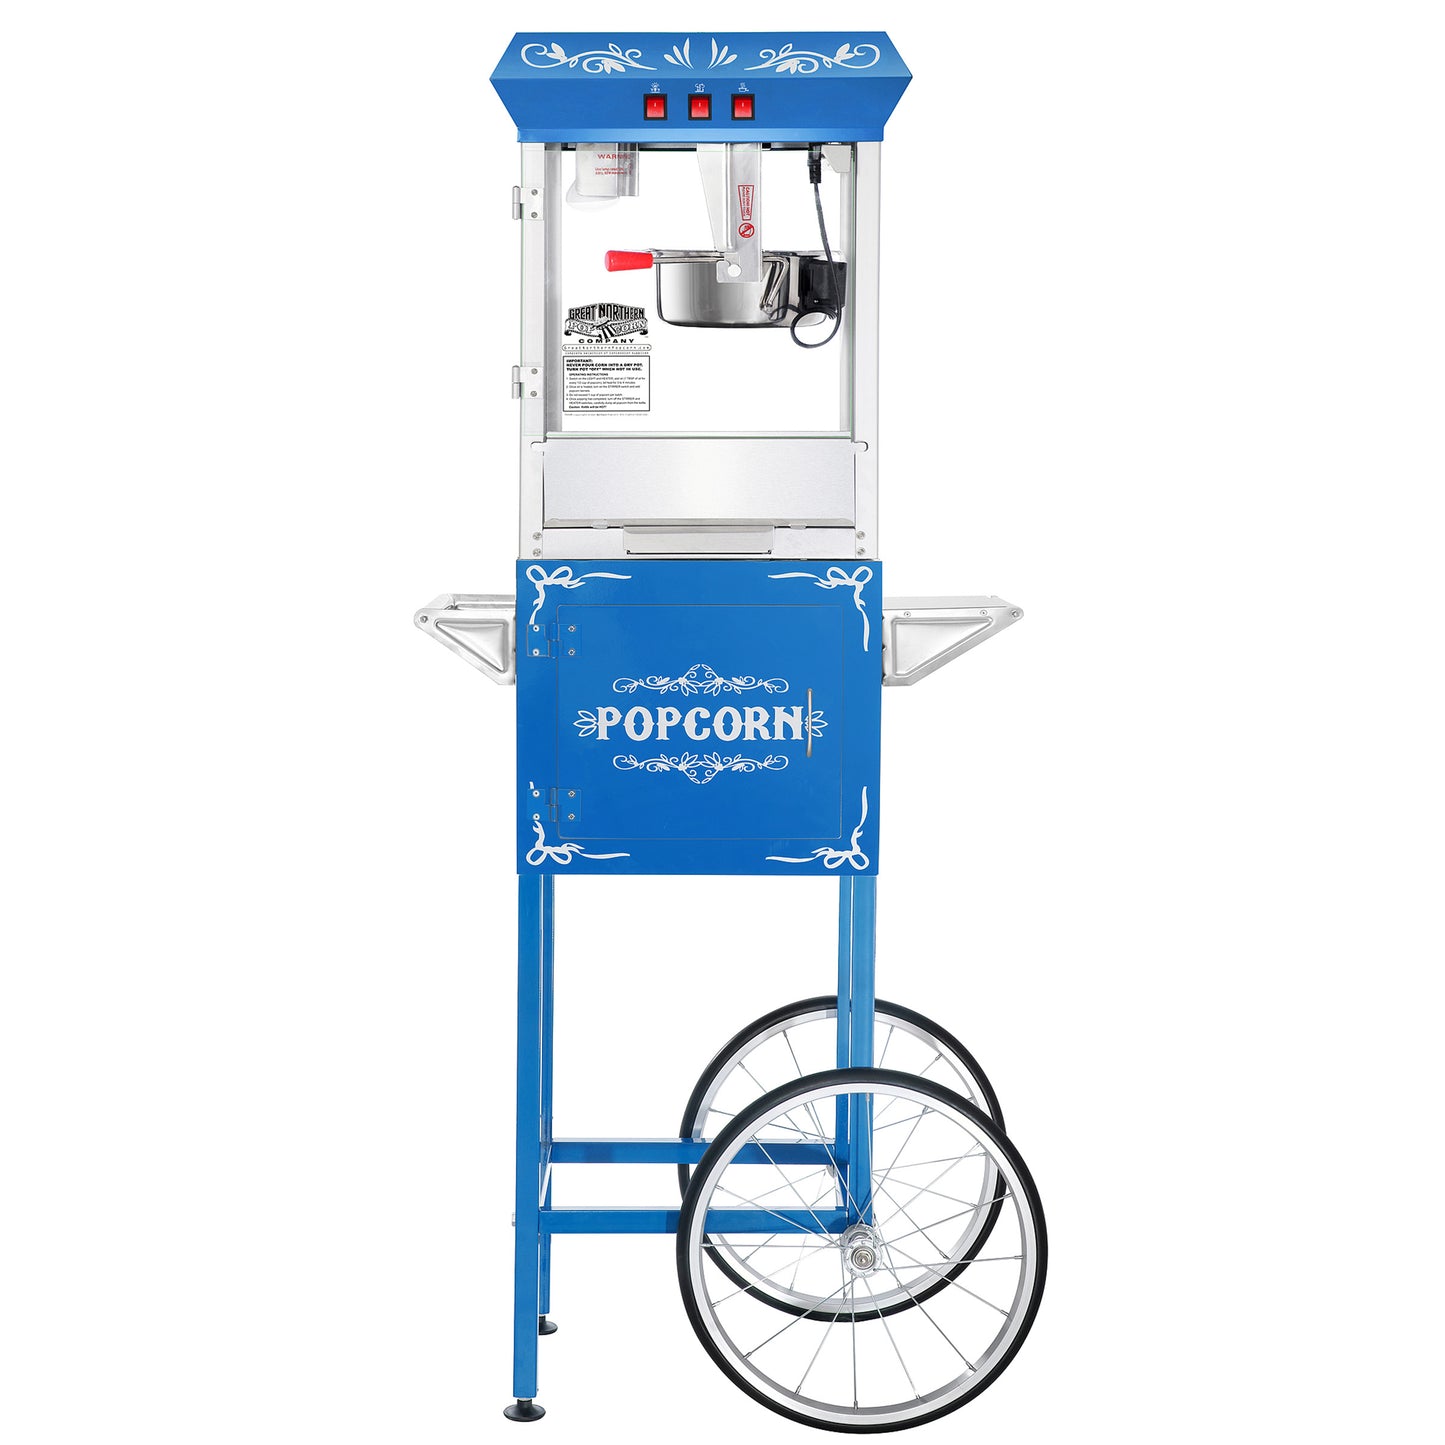 Foundation Popcorn Machine with Cart, 8 Ounce Kettle and 5-Pack of All-in-One Kernels - Blue